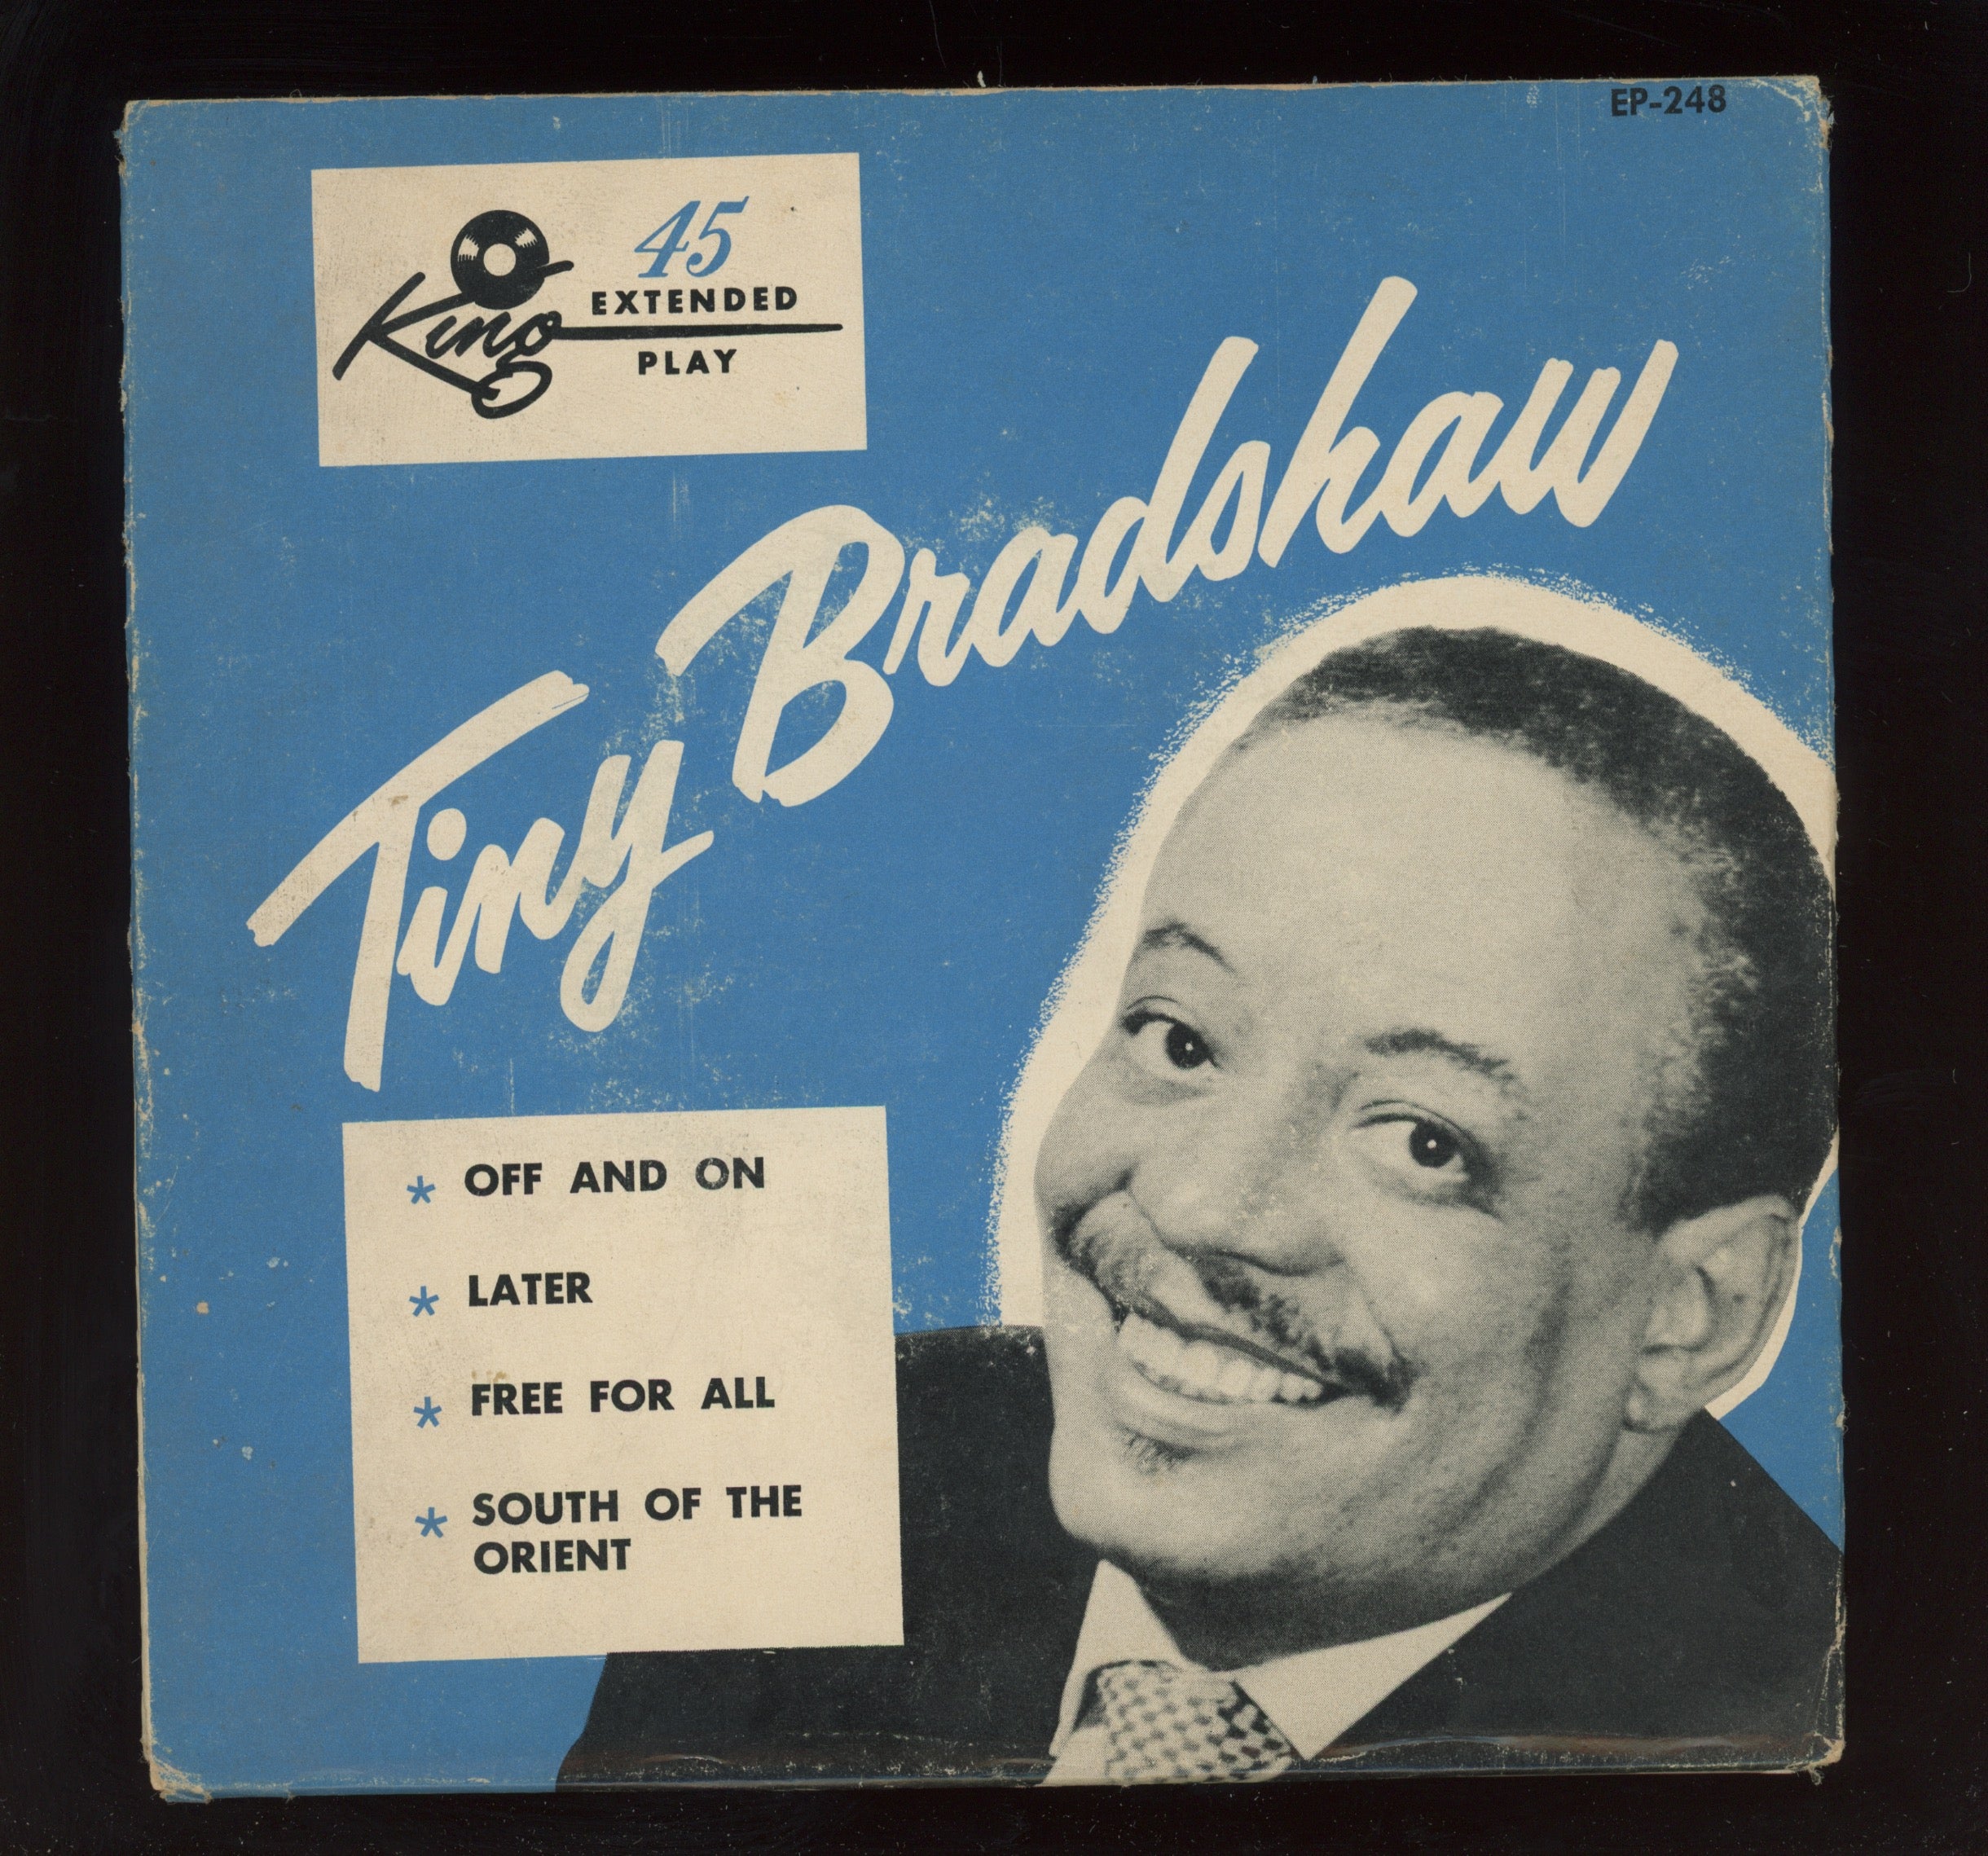 Tiny Bradshaw - Off And On on King R&B 45 EP With Cover